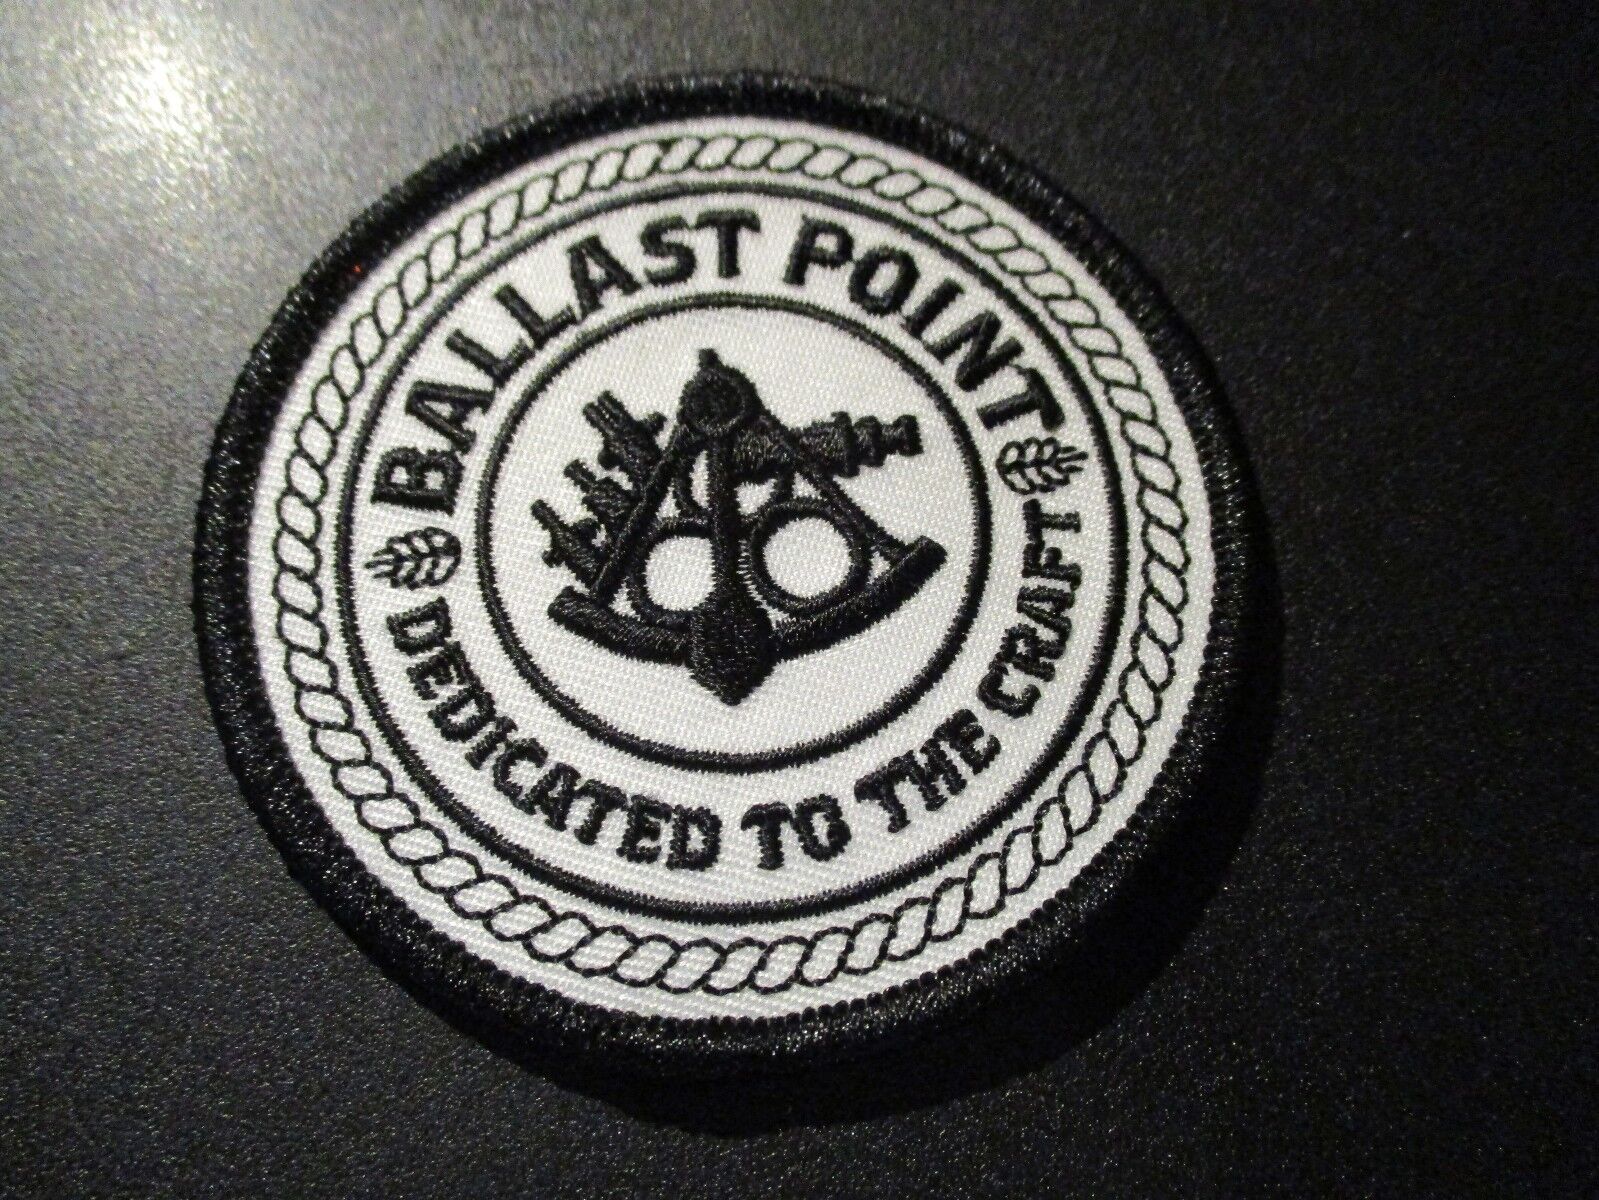 BALLAST POINT sculpin wht black sextant PATCH iron on craft beer brewing brewery